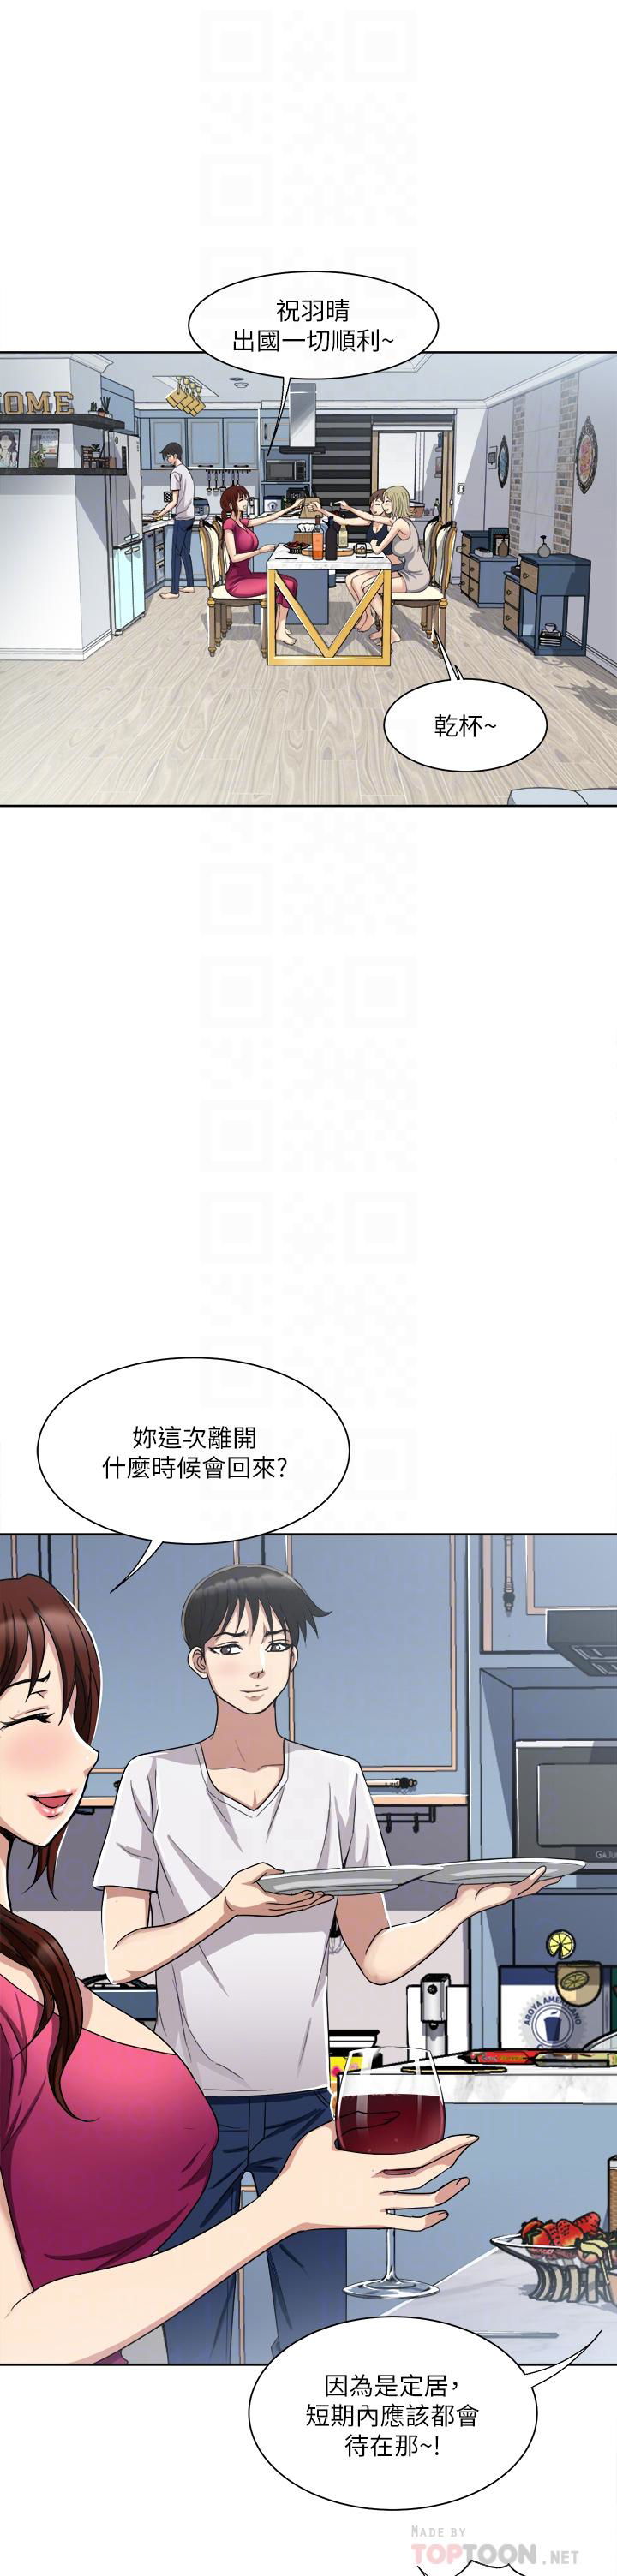 just-once-raw-chap-3-13